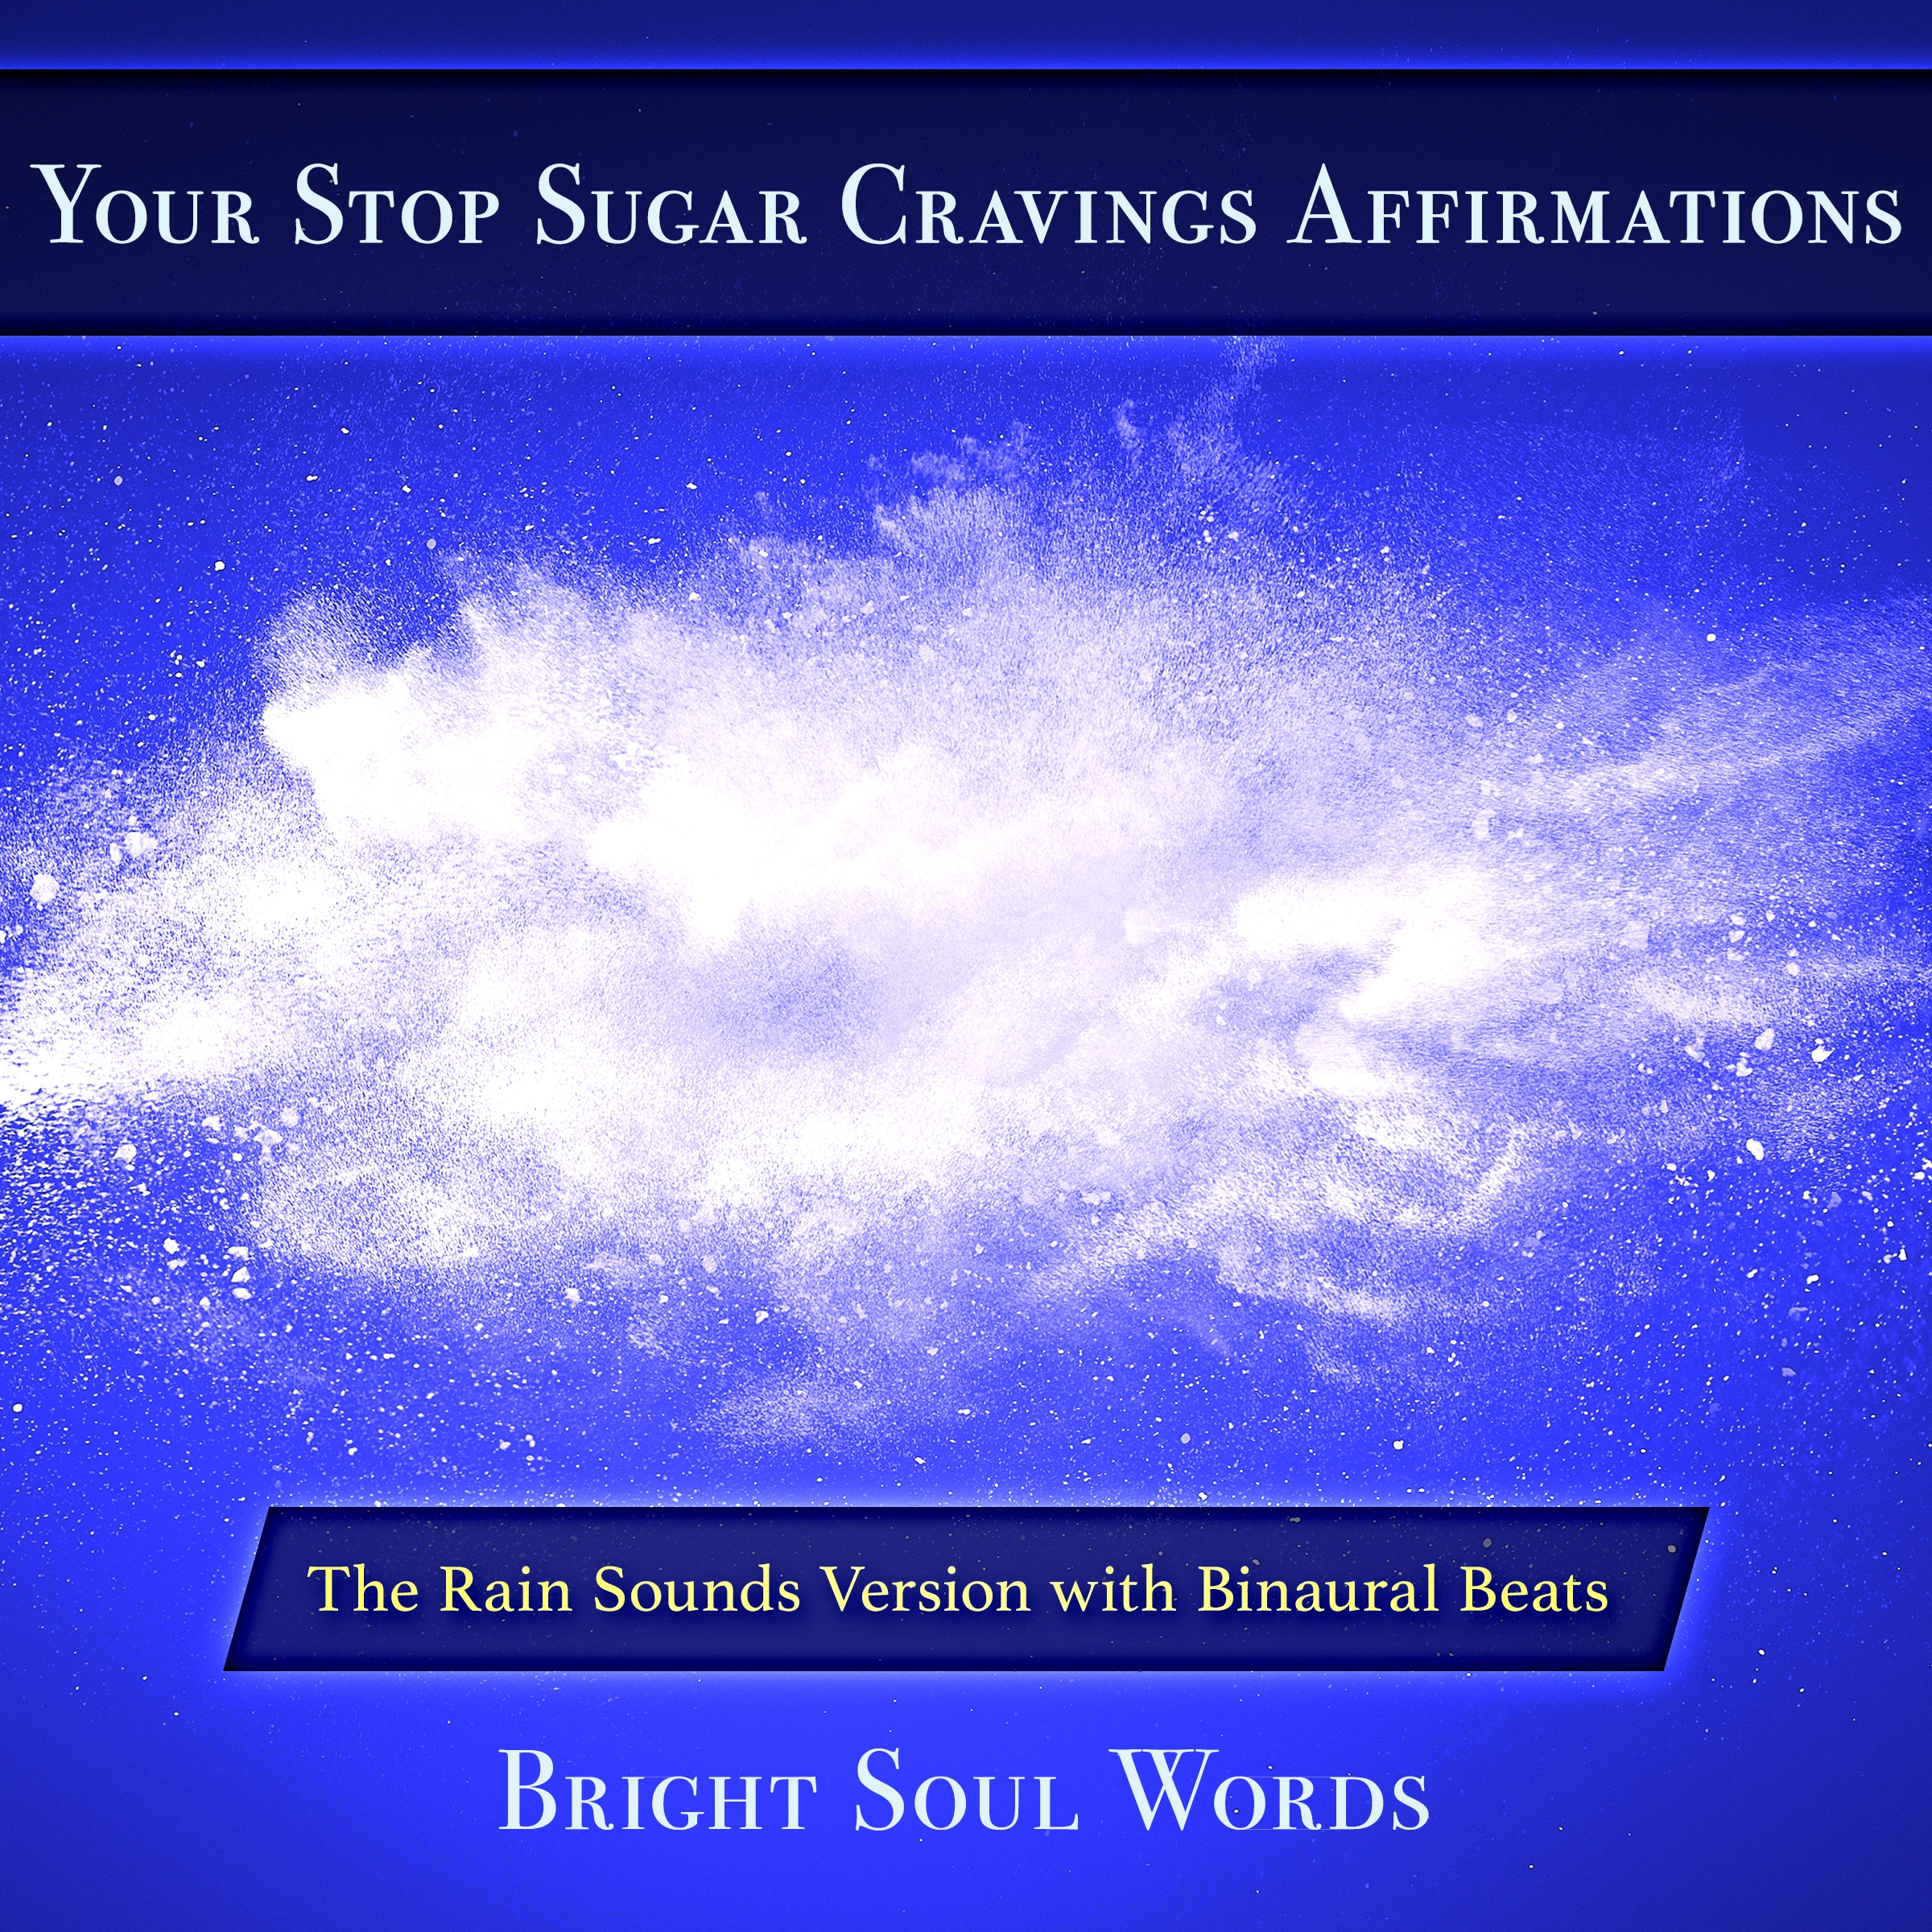 Your Stop Sugar Cravings Affirmations: The Rain Sounds Version with Binaural Beats Audiobook by Bright Soul Words